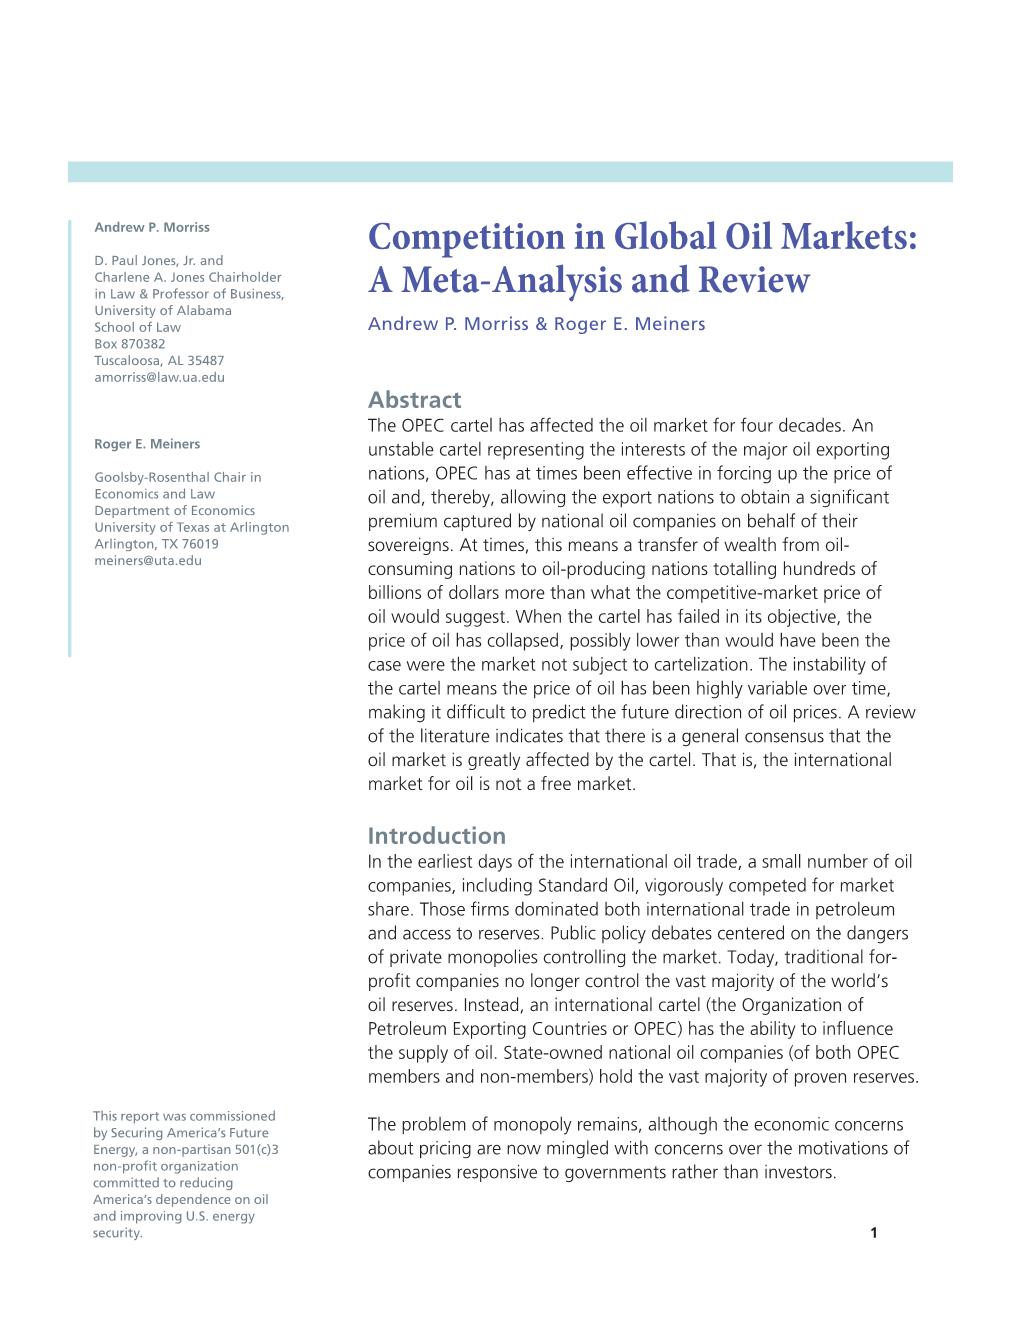 Competition in Global Oil Markets: a Meta-Analysis and Review